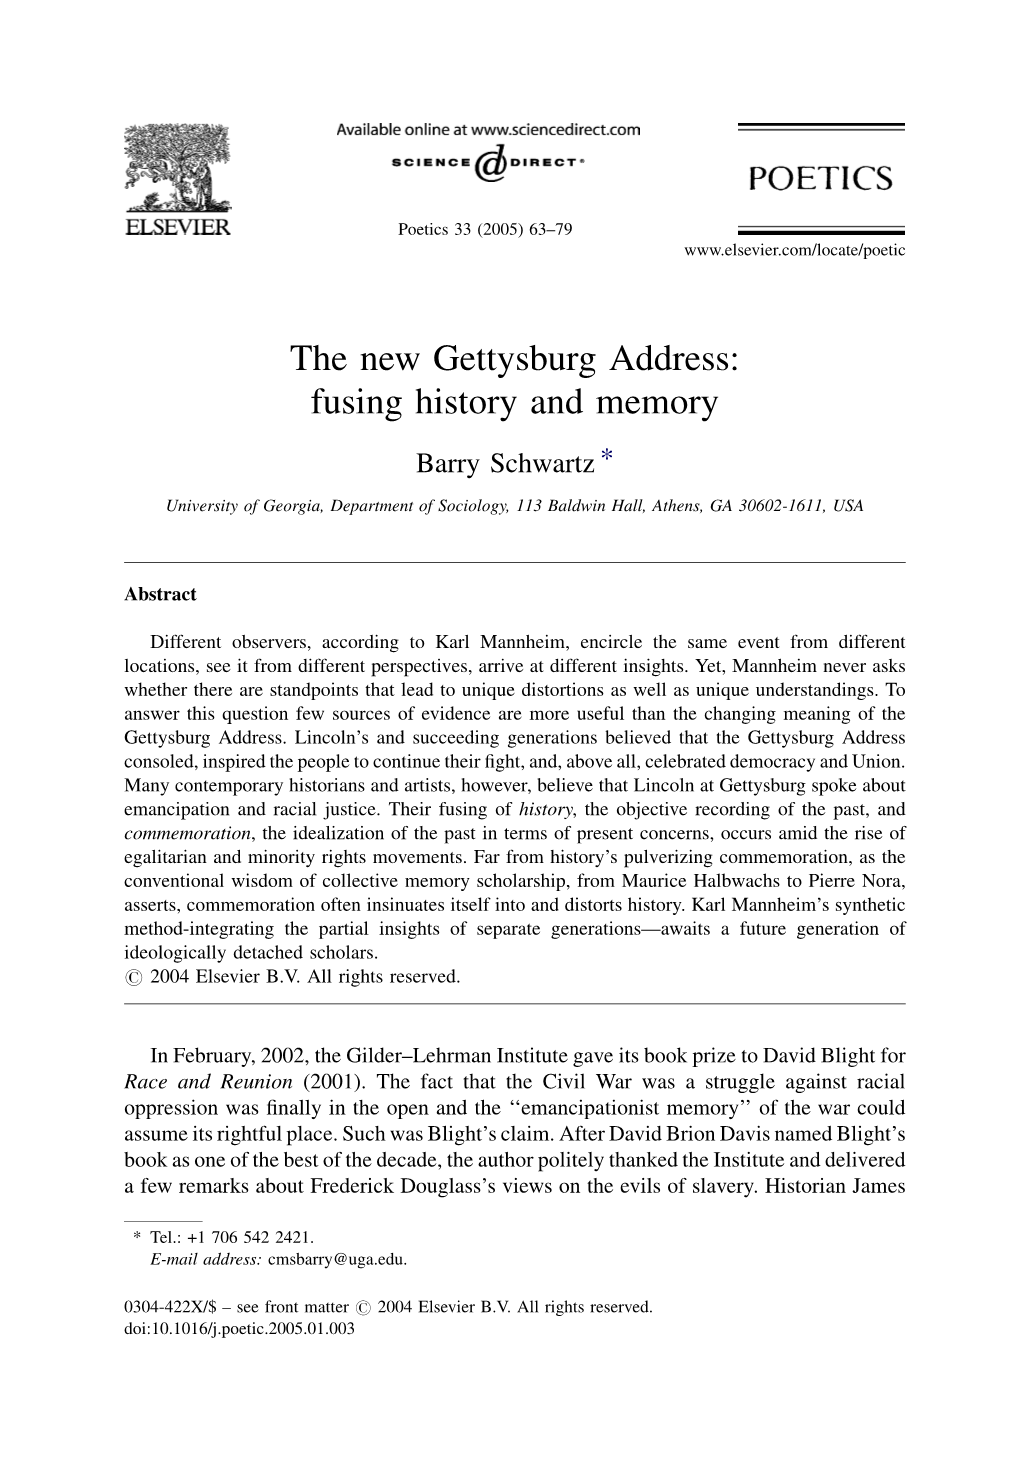 The New Gettysburg Address: Fusing History and Memory